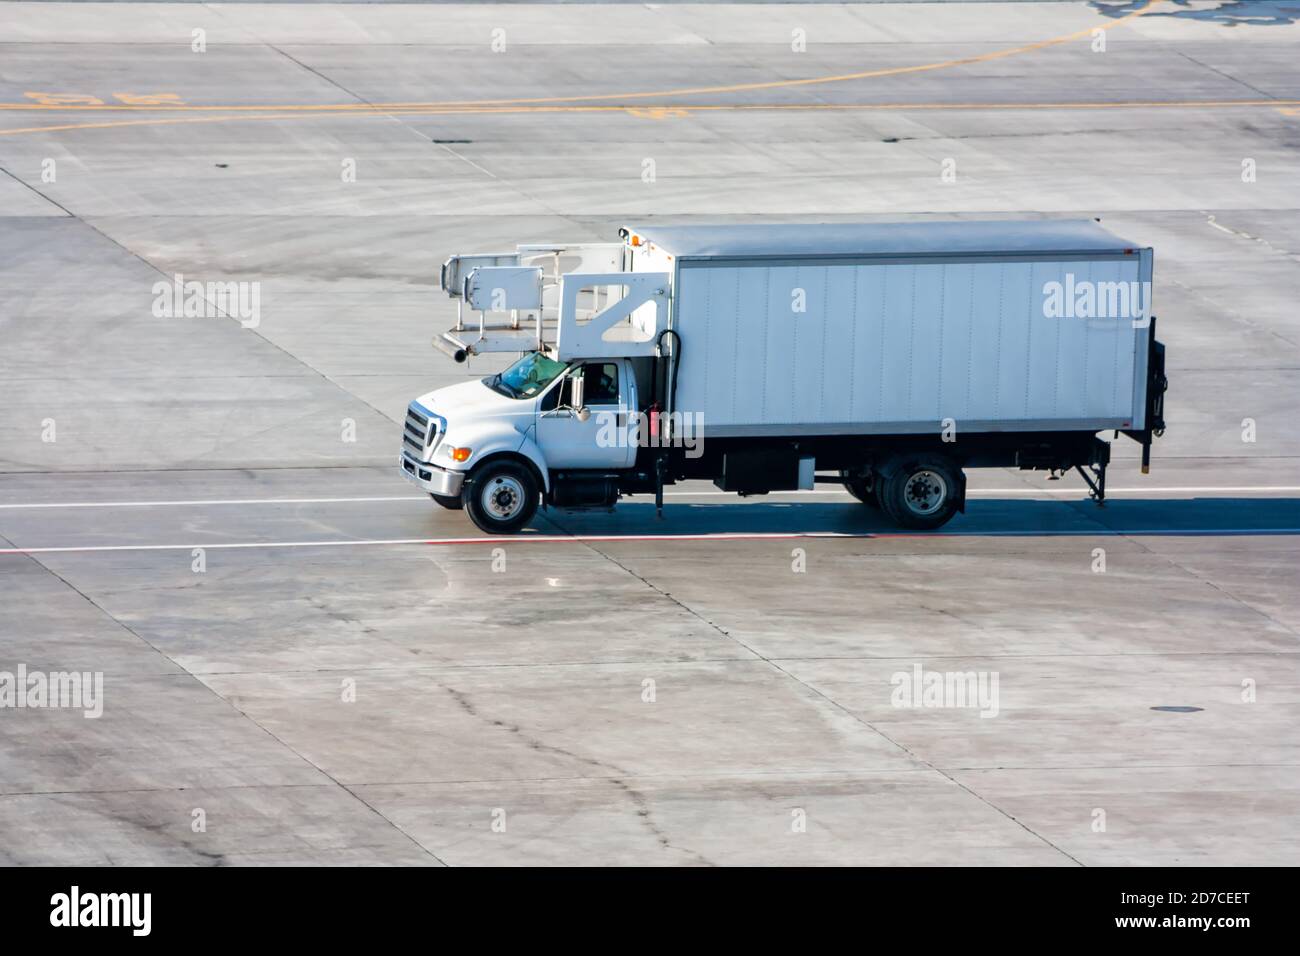 Airport catering truck Stock Photo